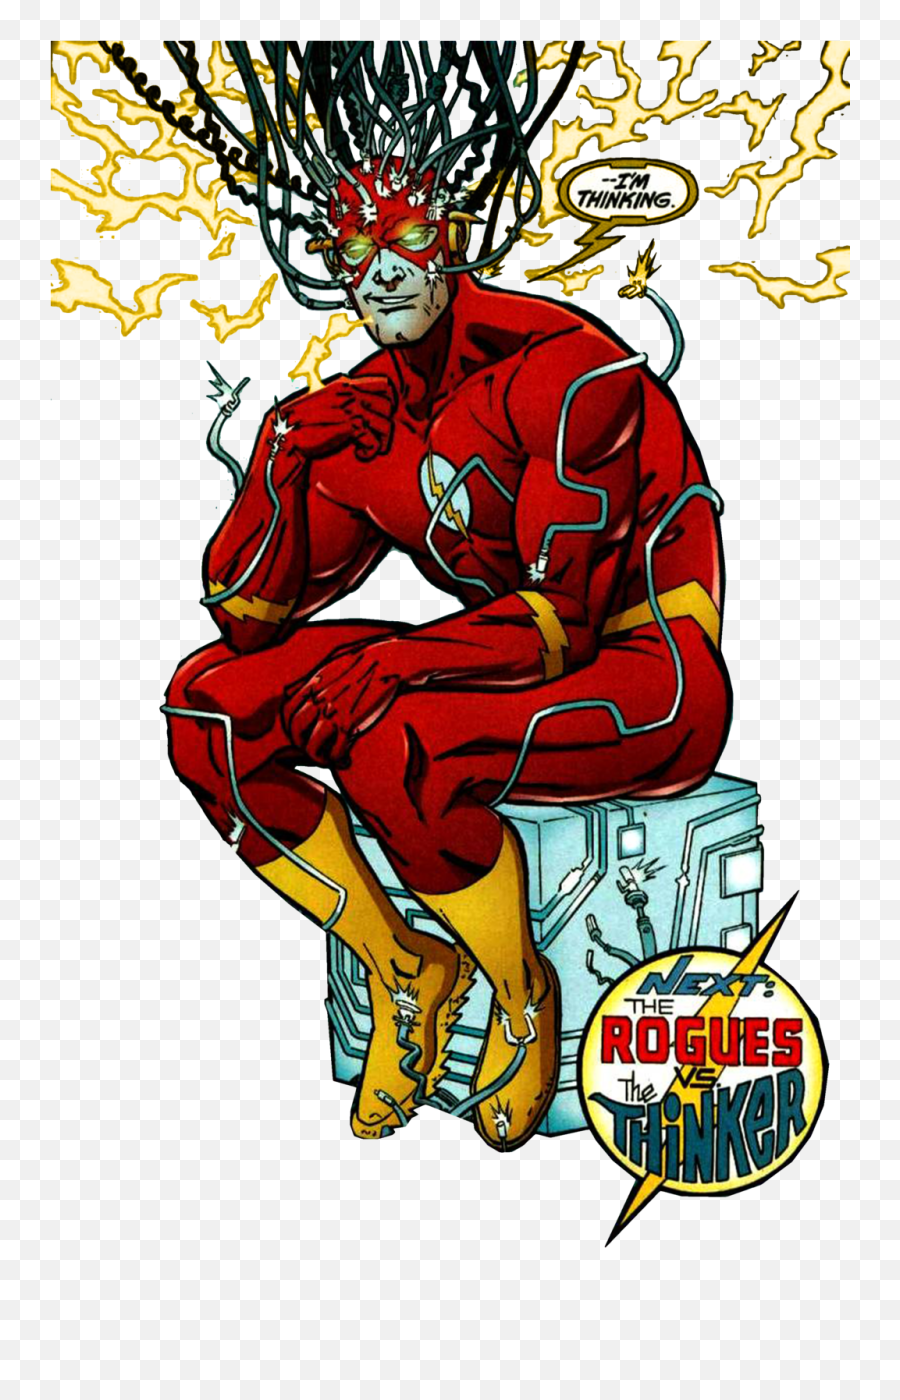 With Devoe Body Swapping - Body Swap Dc Comics Png,The Thinker Png